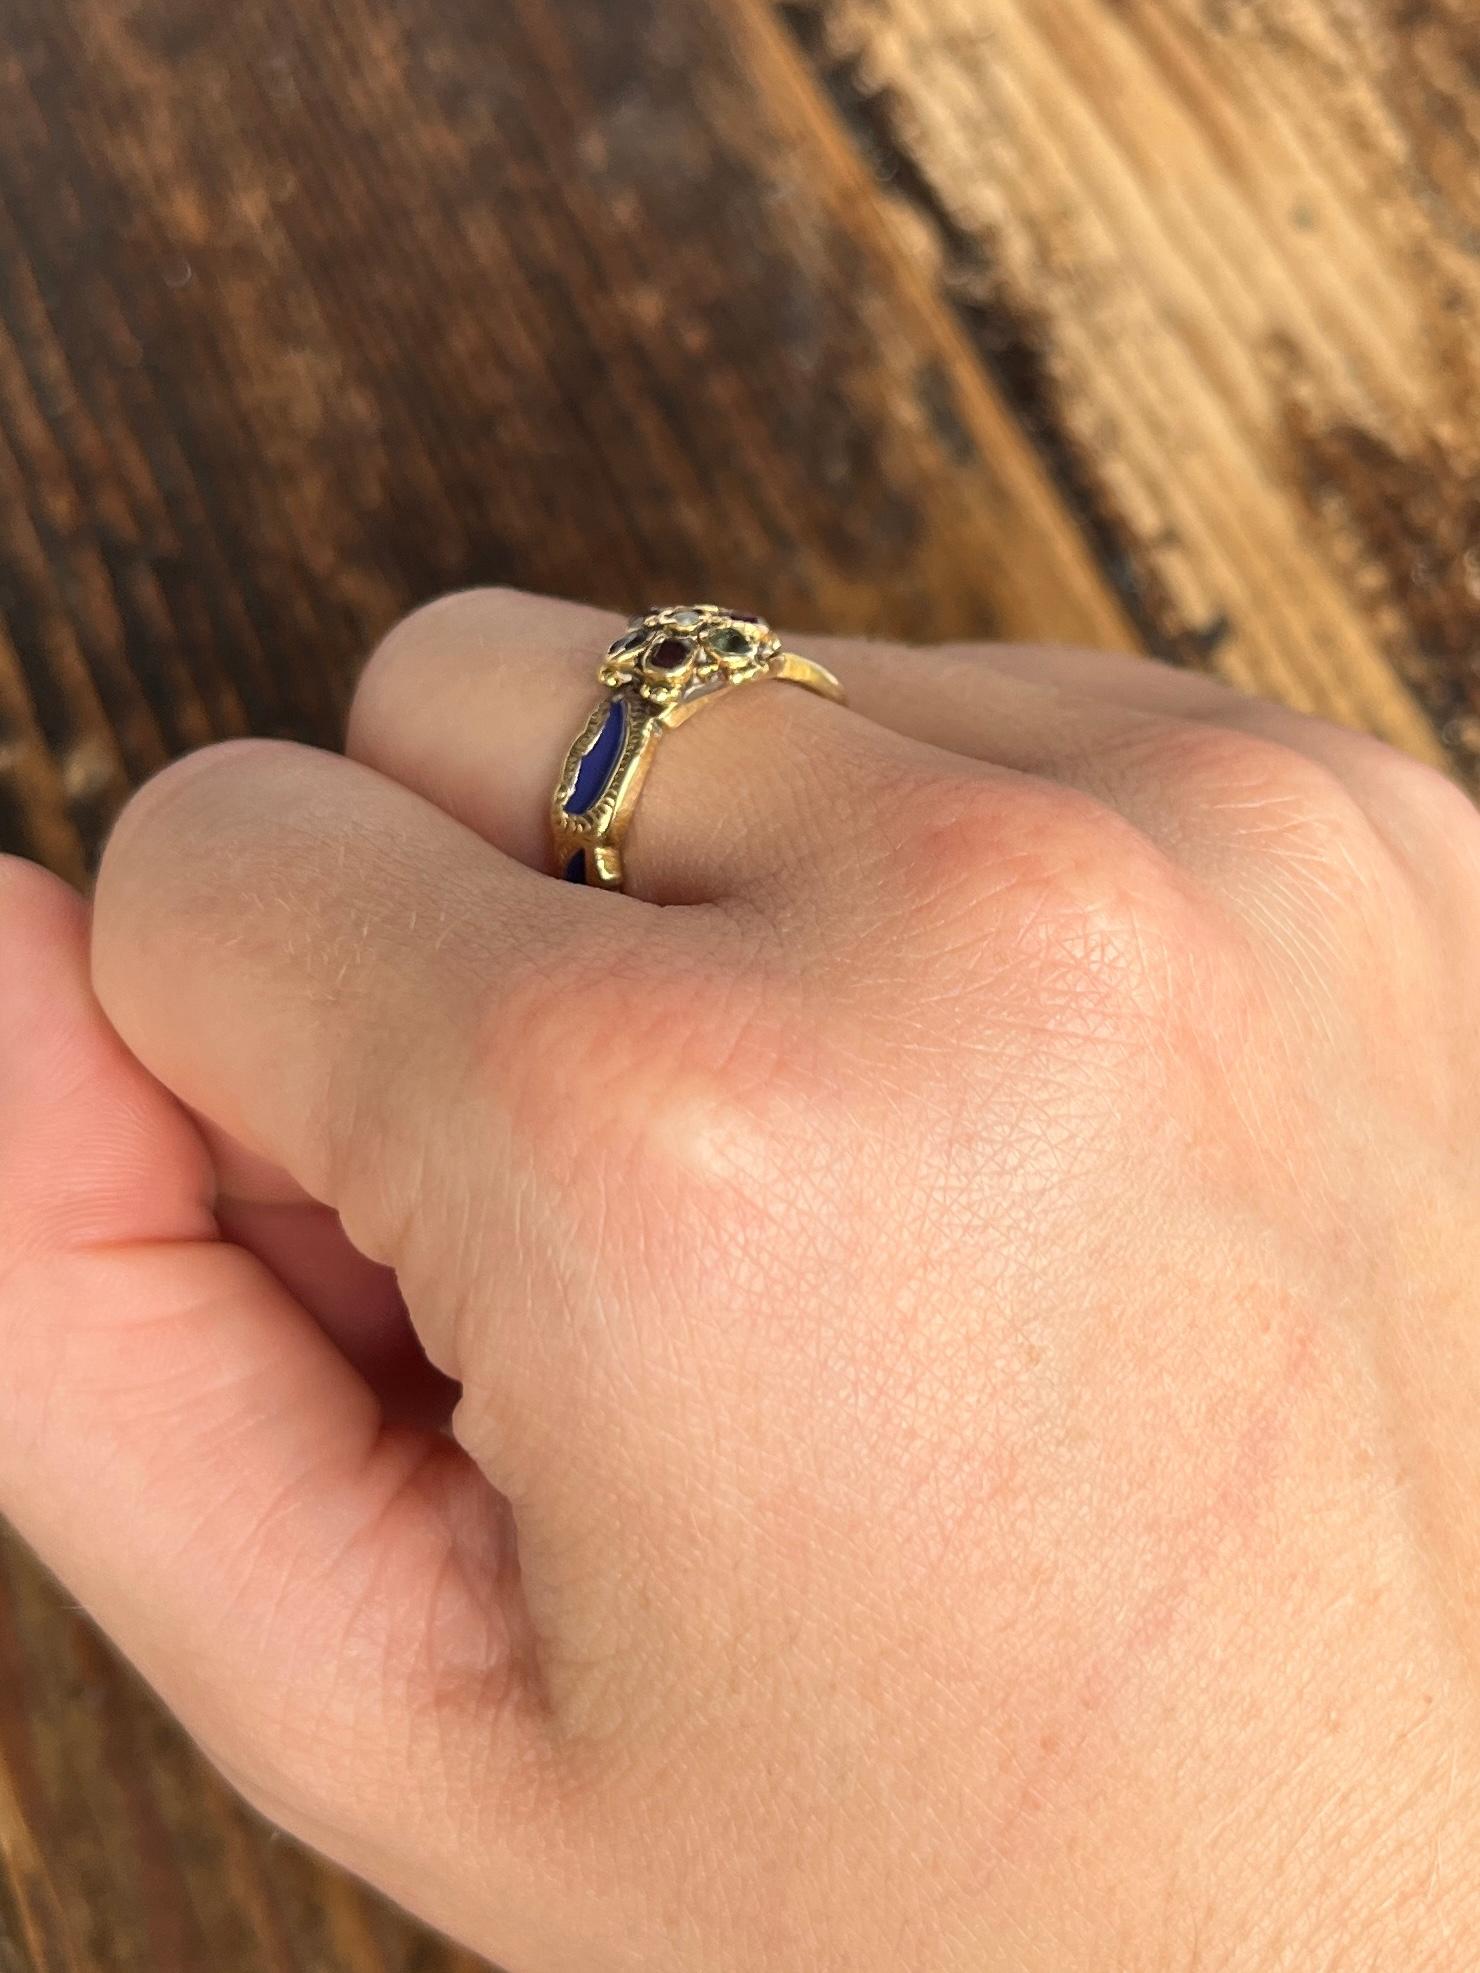 This antique band has dark blue enamel all the way around. The stones in the cluster at the front of the ring spells 